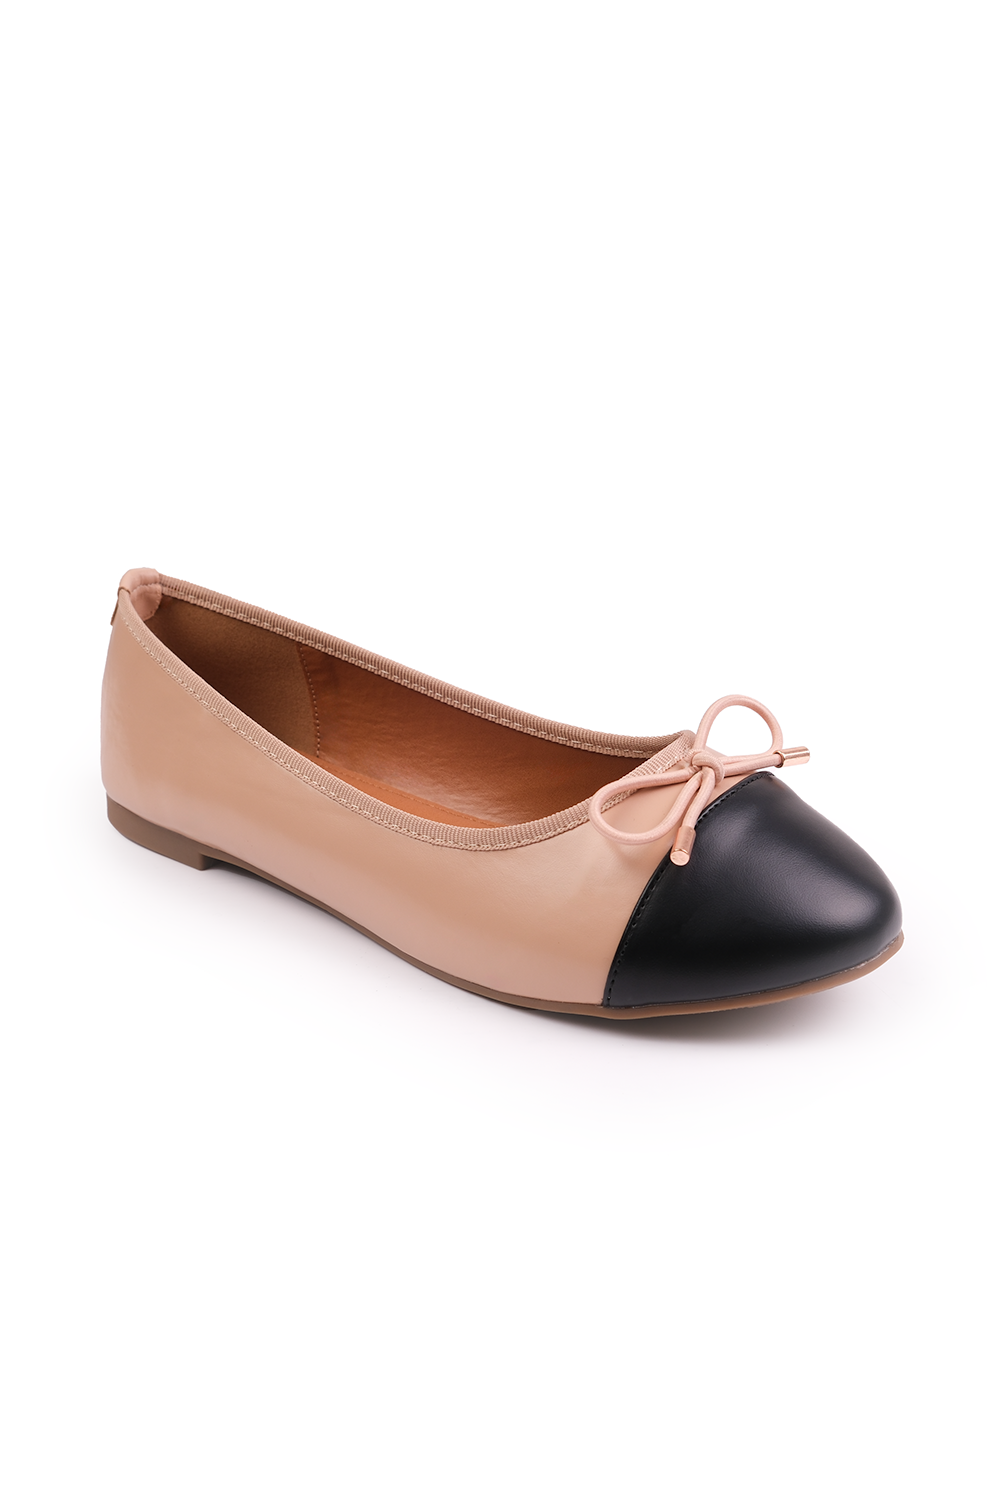 JANICE BALLERINA FLATS WITH FRON BOW DETAIL IN NUDE FAUX LEATHER